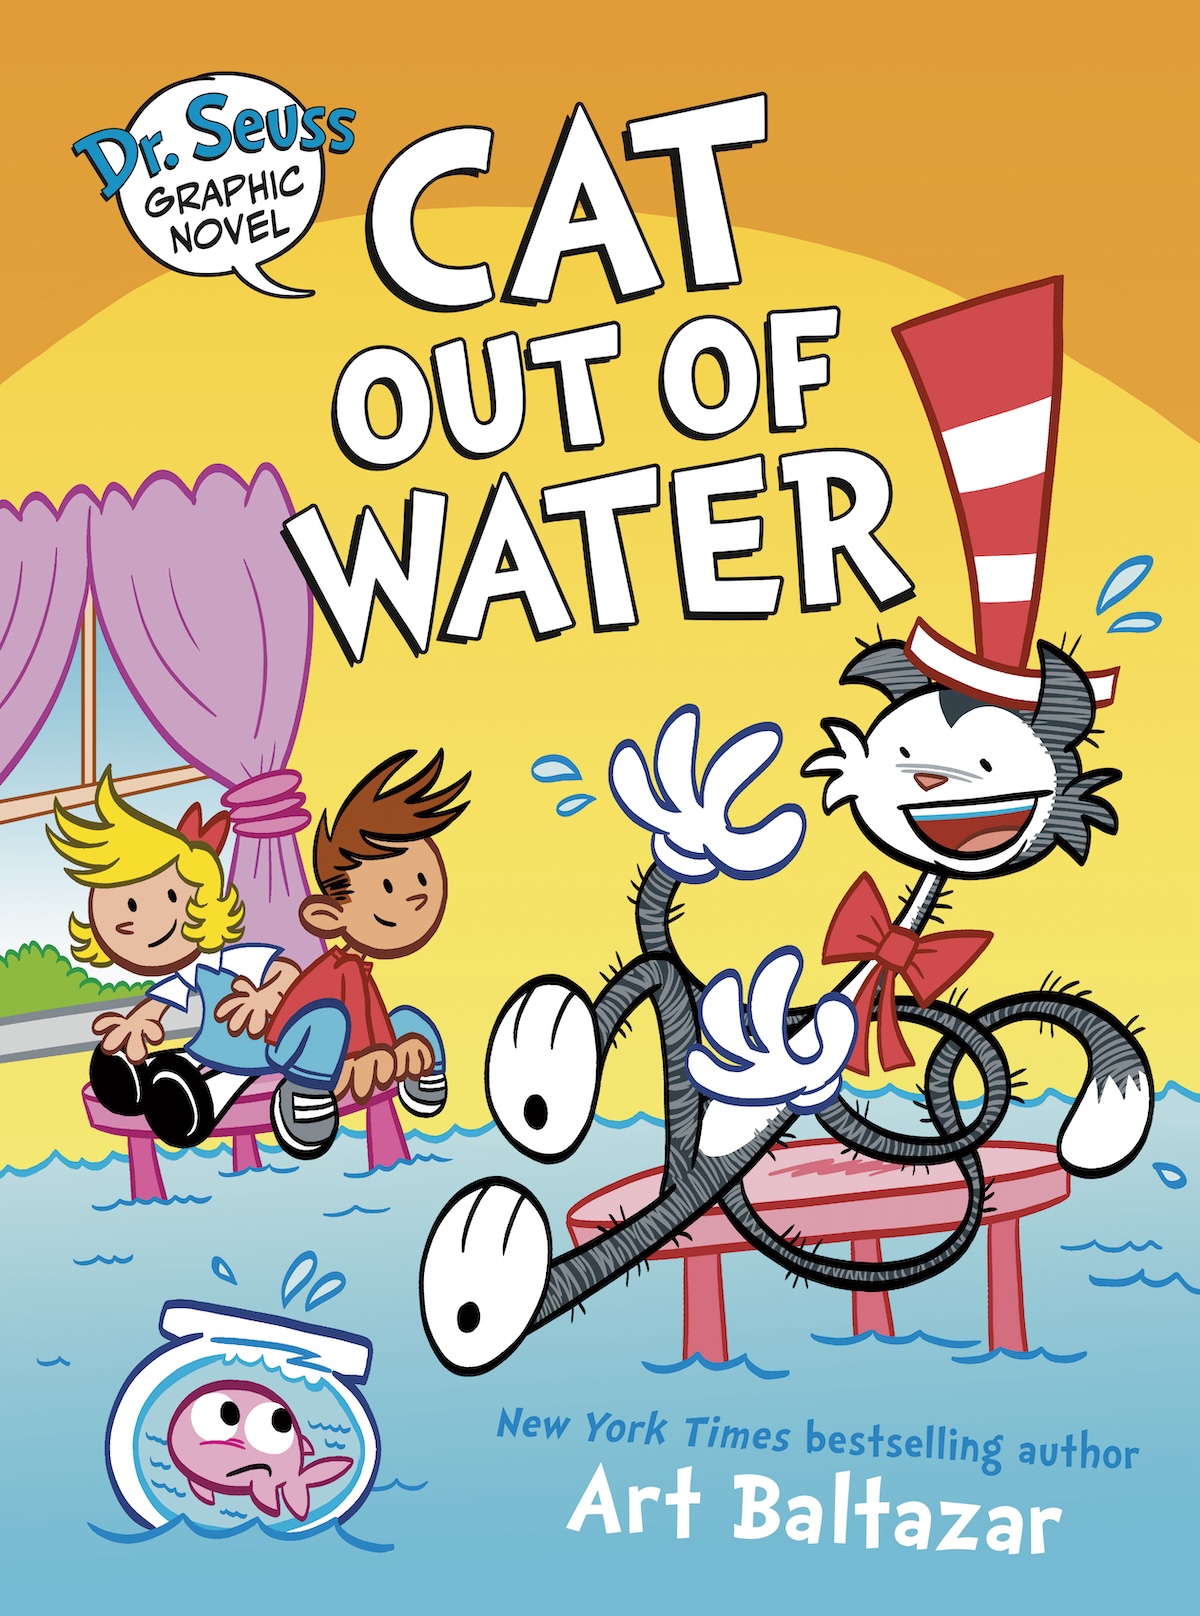 Cat Out of Water cover by Art Baltazar